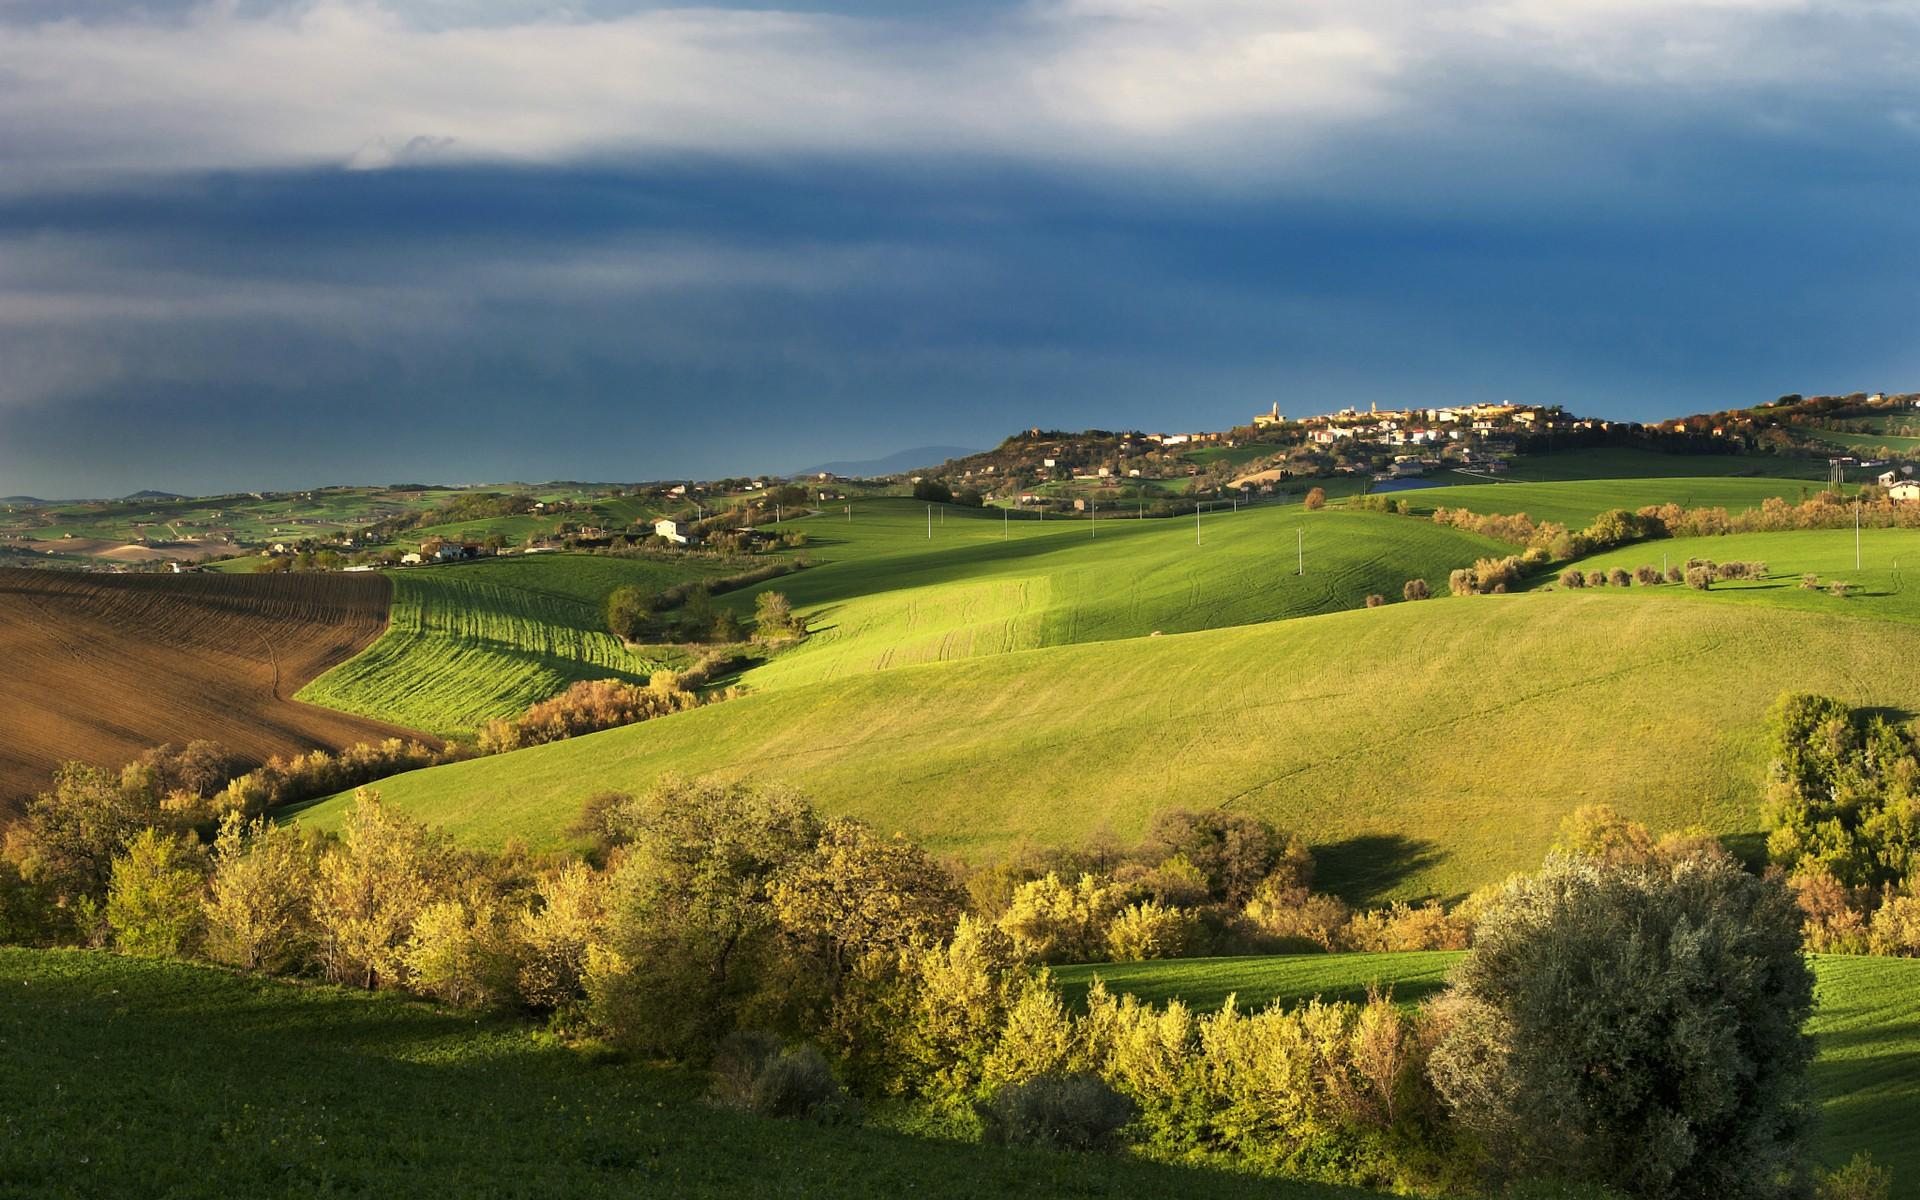 Wallpaper of Tuscan Countryside Wallpapers Hd